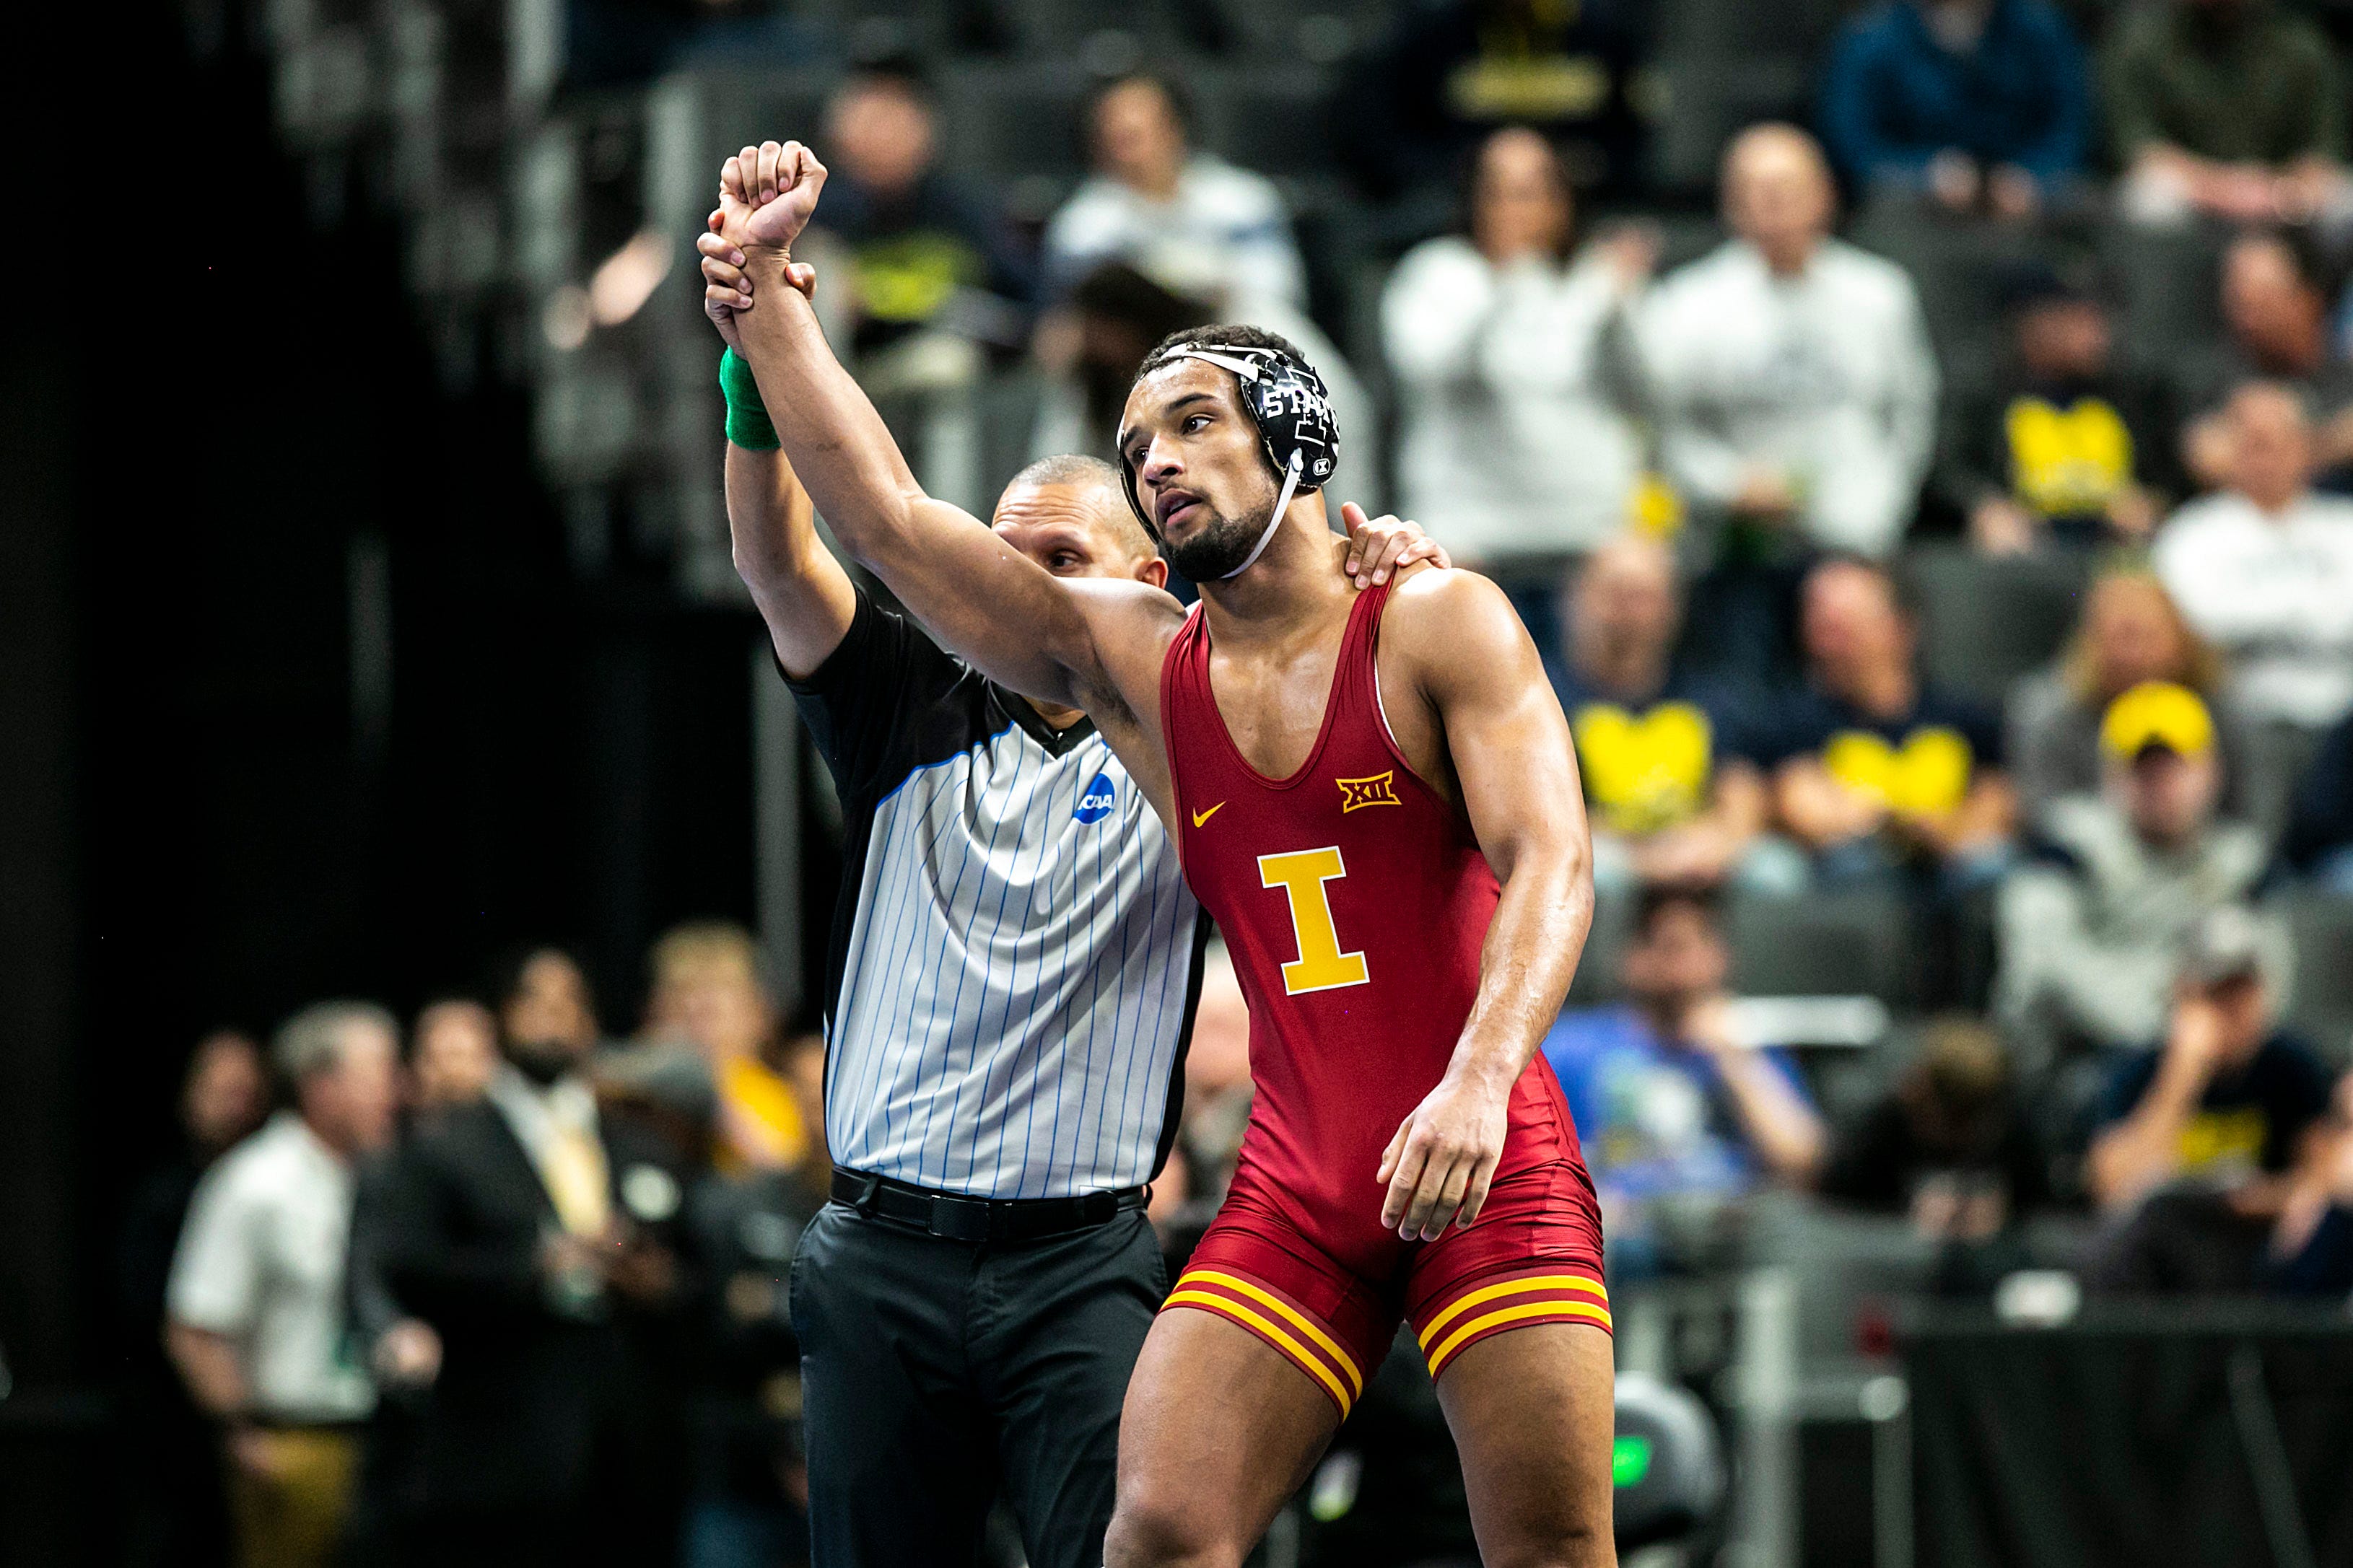 Iowa State wrestlers beat Illinois in Beauty and the Beast event at